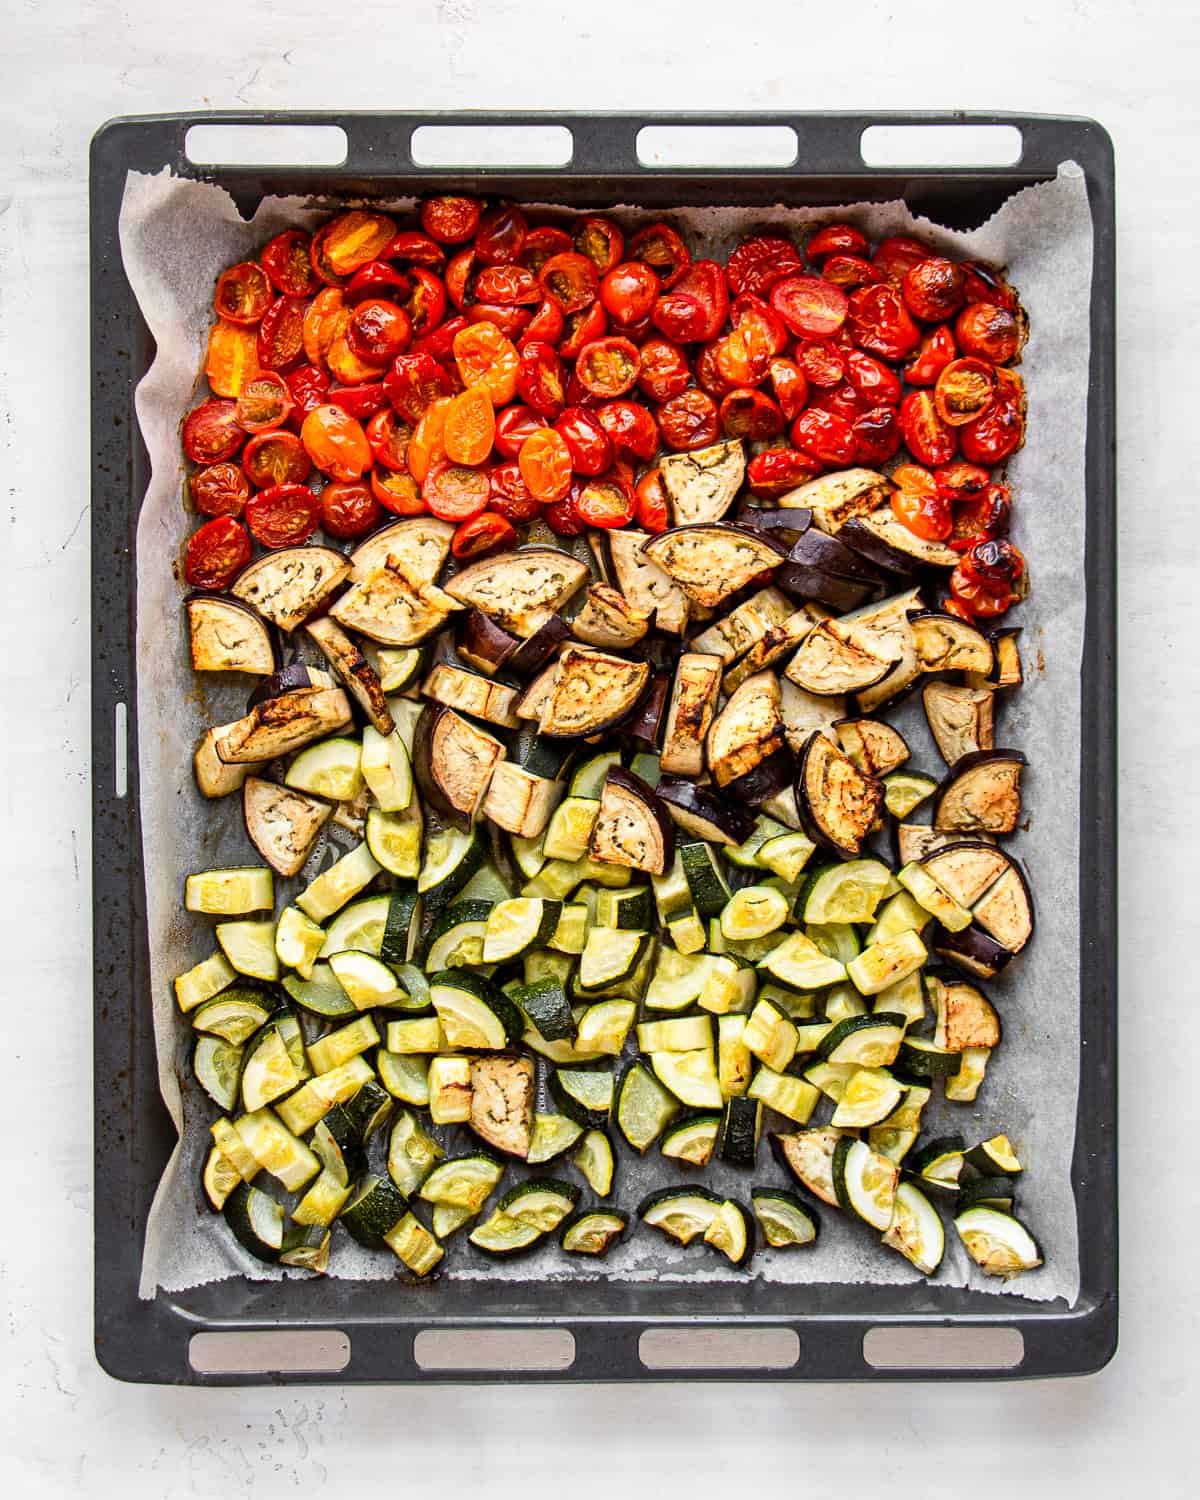 Roasted zucchini, eggplant, and cherry tomatoes on a baking sheet.